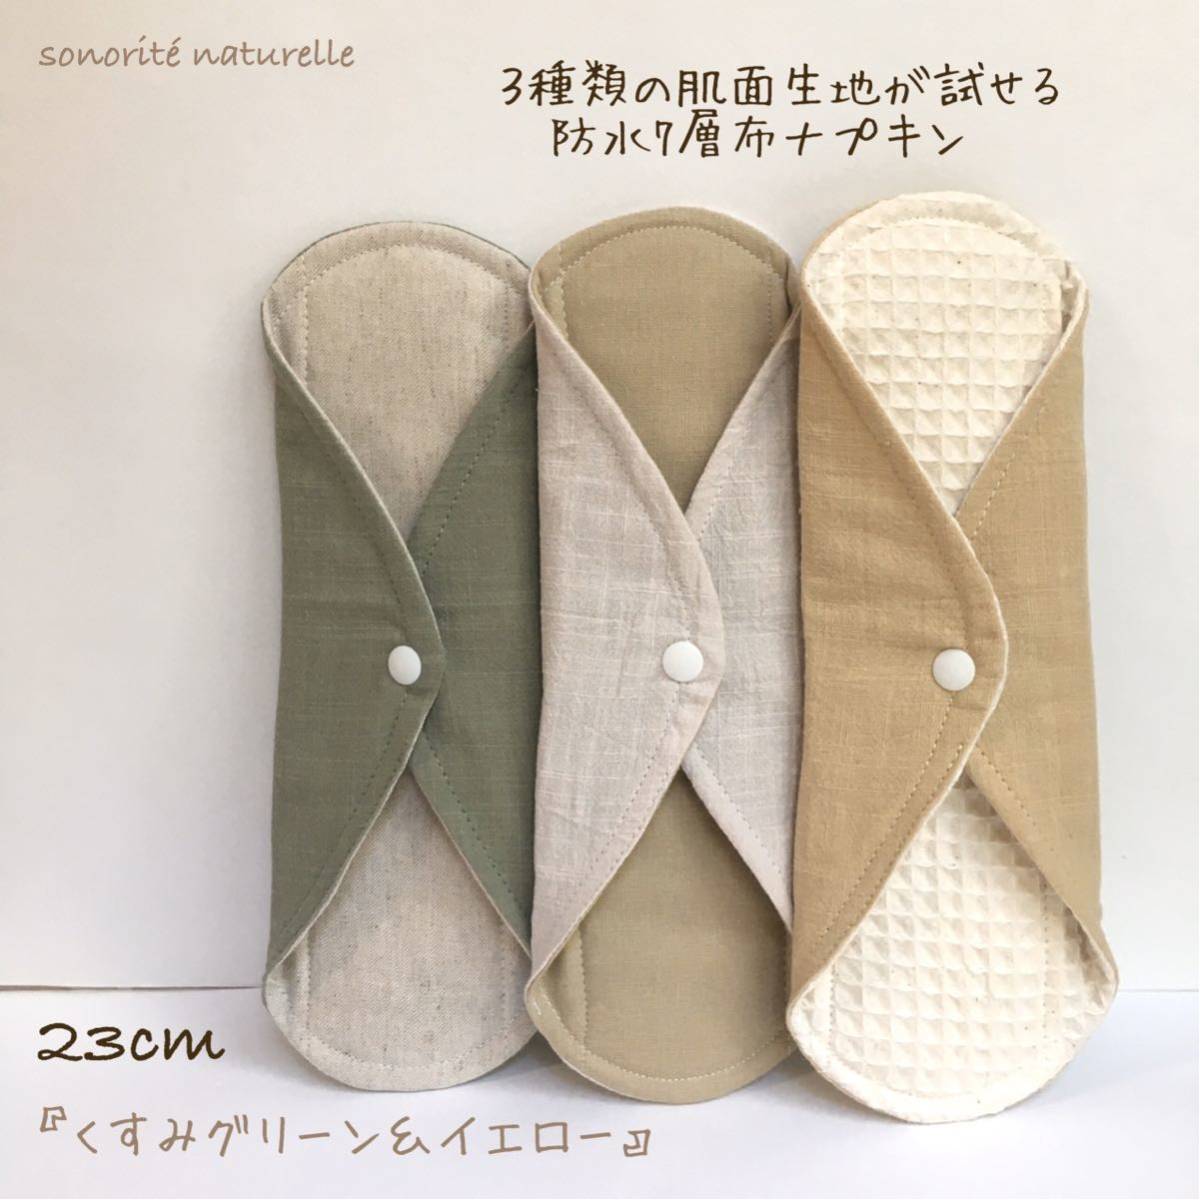 [ trial ]3 kind . surface material .... waterproof 7 layer fabric napkin 3 pieces set 